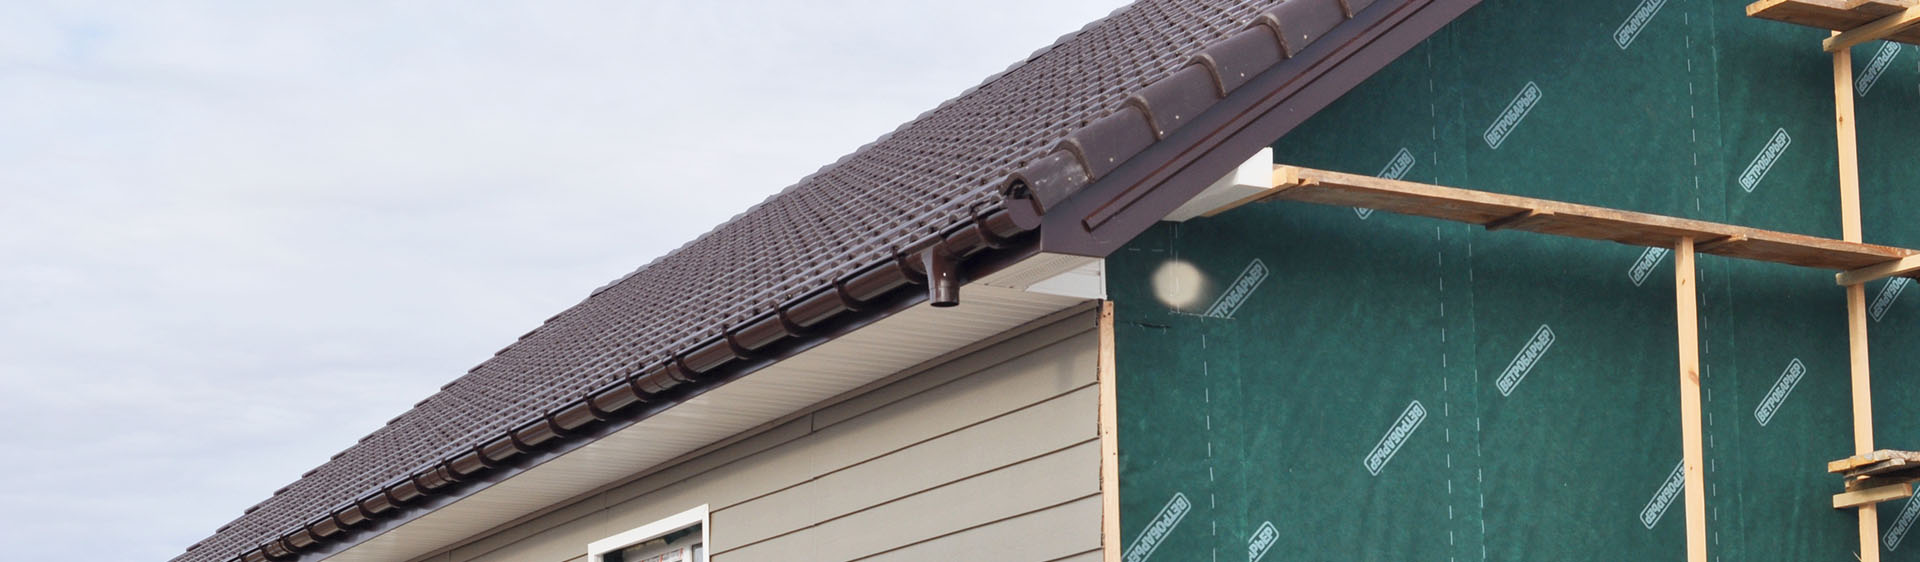 Martinez Gutter Cleaning, Gutter Installation and Siding Services